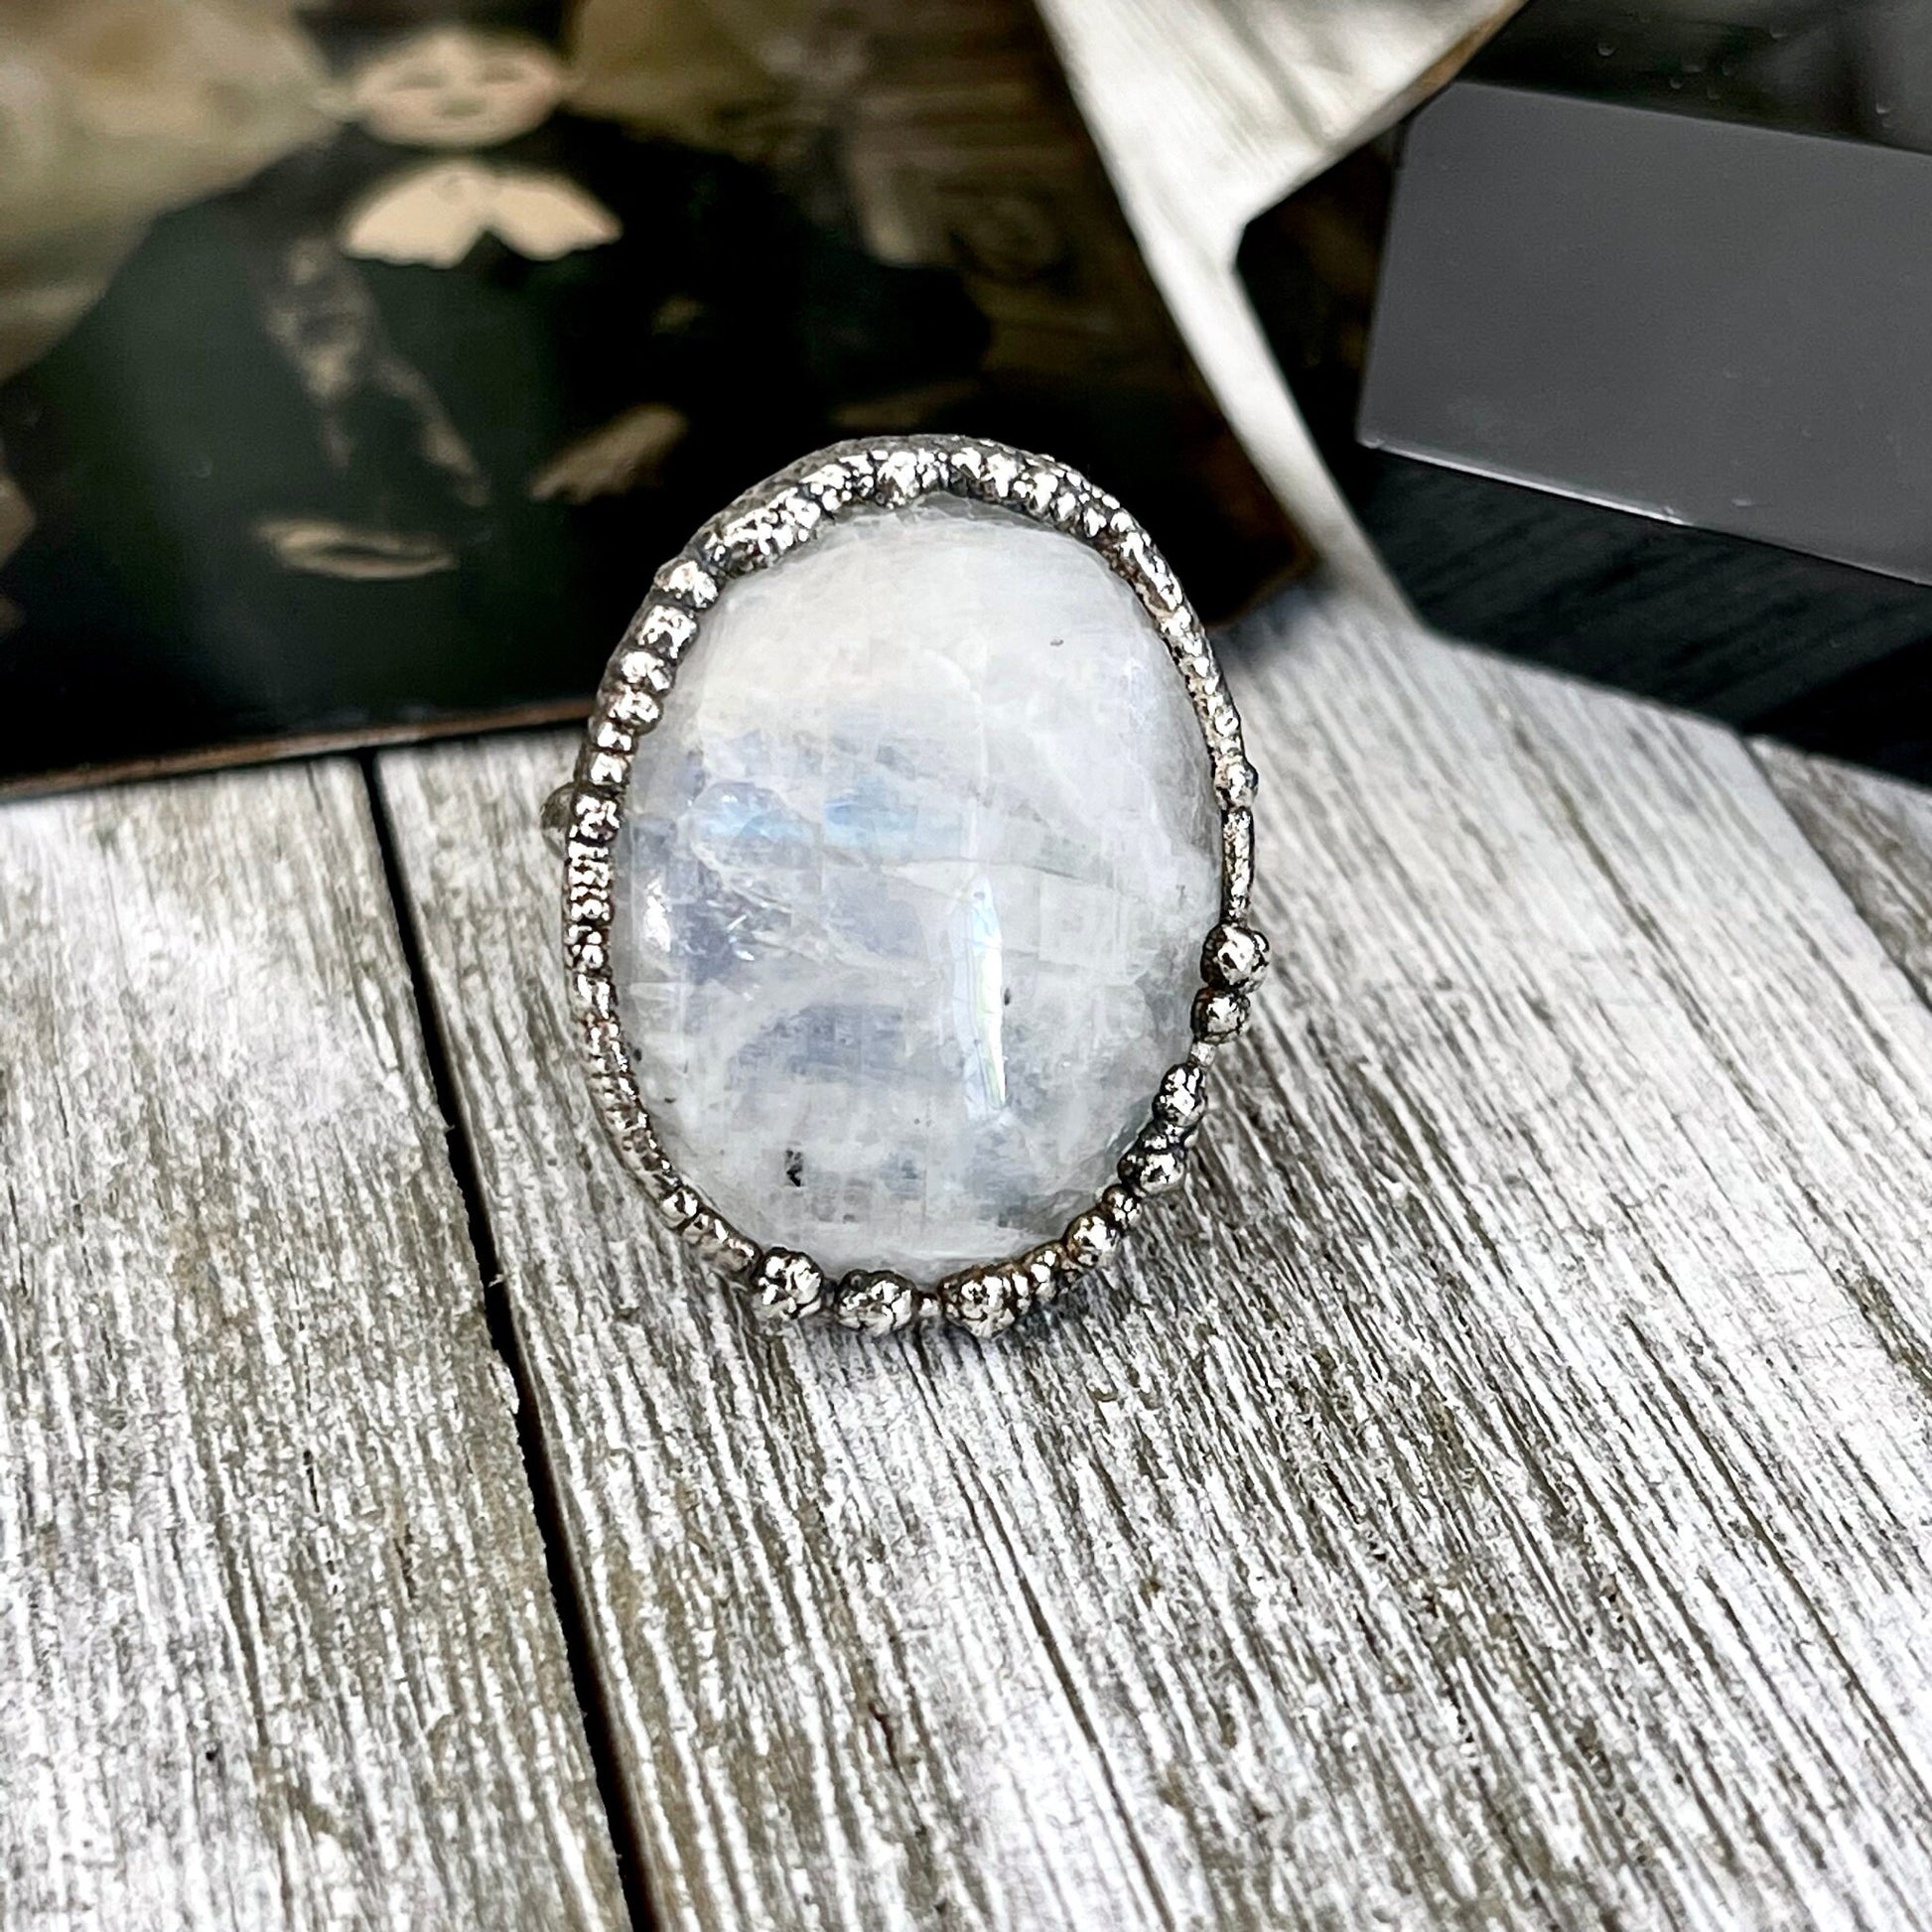 Size 8.5 Rainbow Moonstone Ring in Fine Silver / Foxlark Collection - One of a Kind // Big Bohemian Statement Ring Large Witchy Alternative